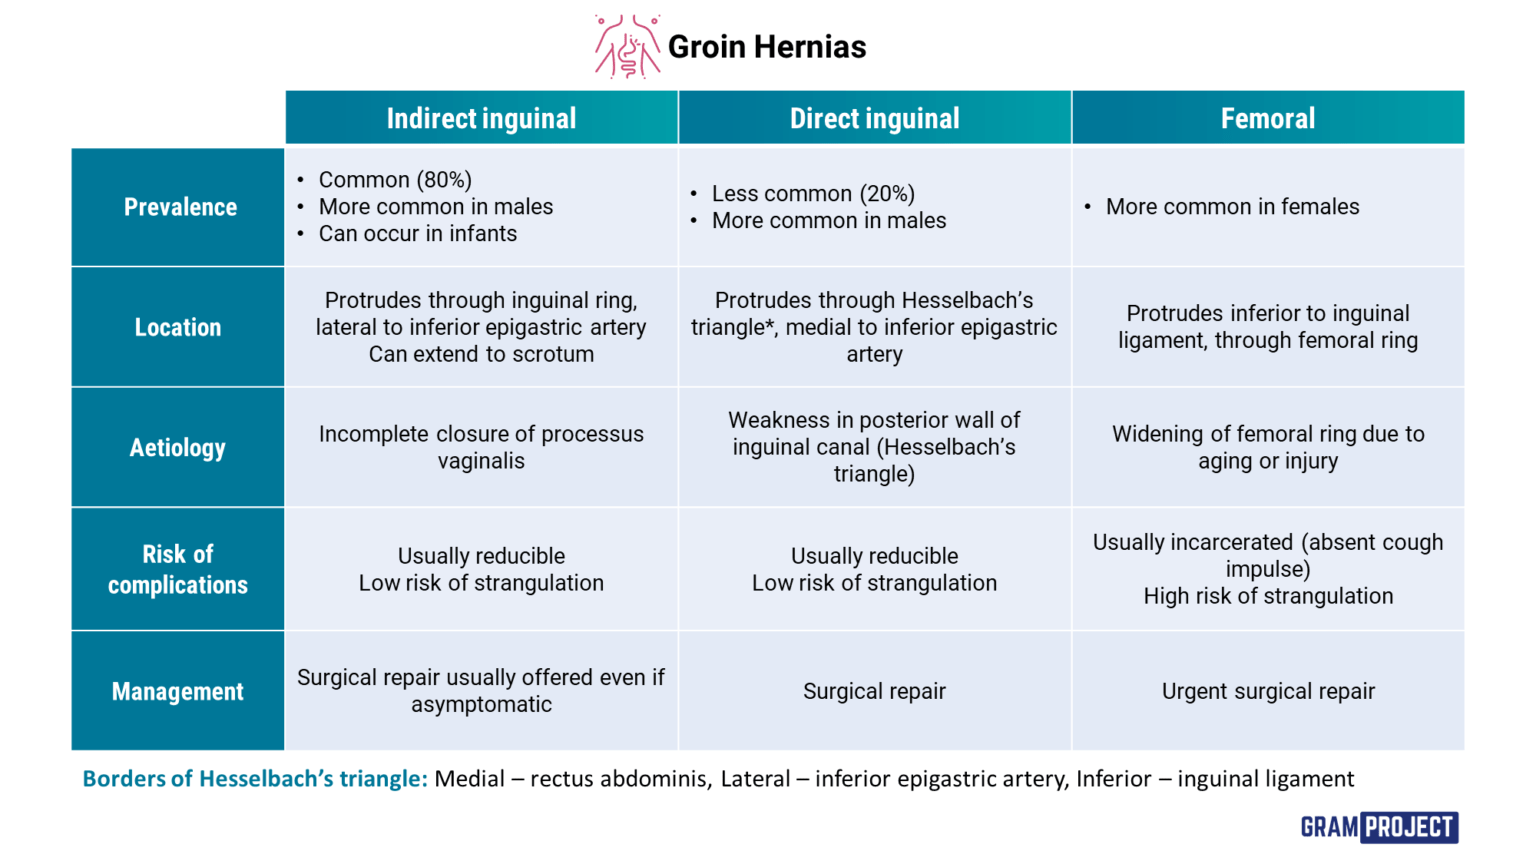 Comparison table of groin hernias